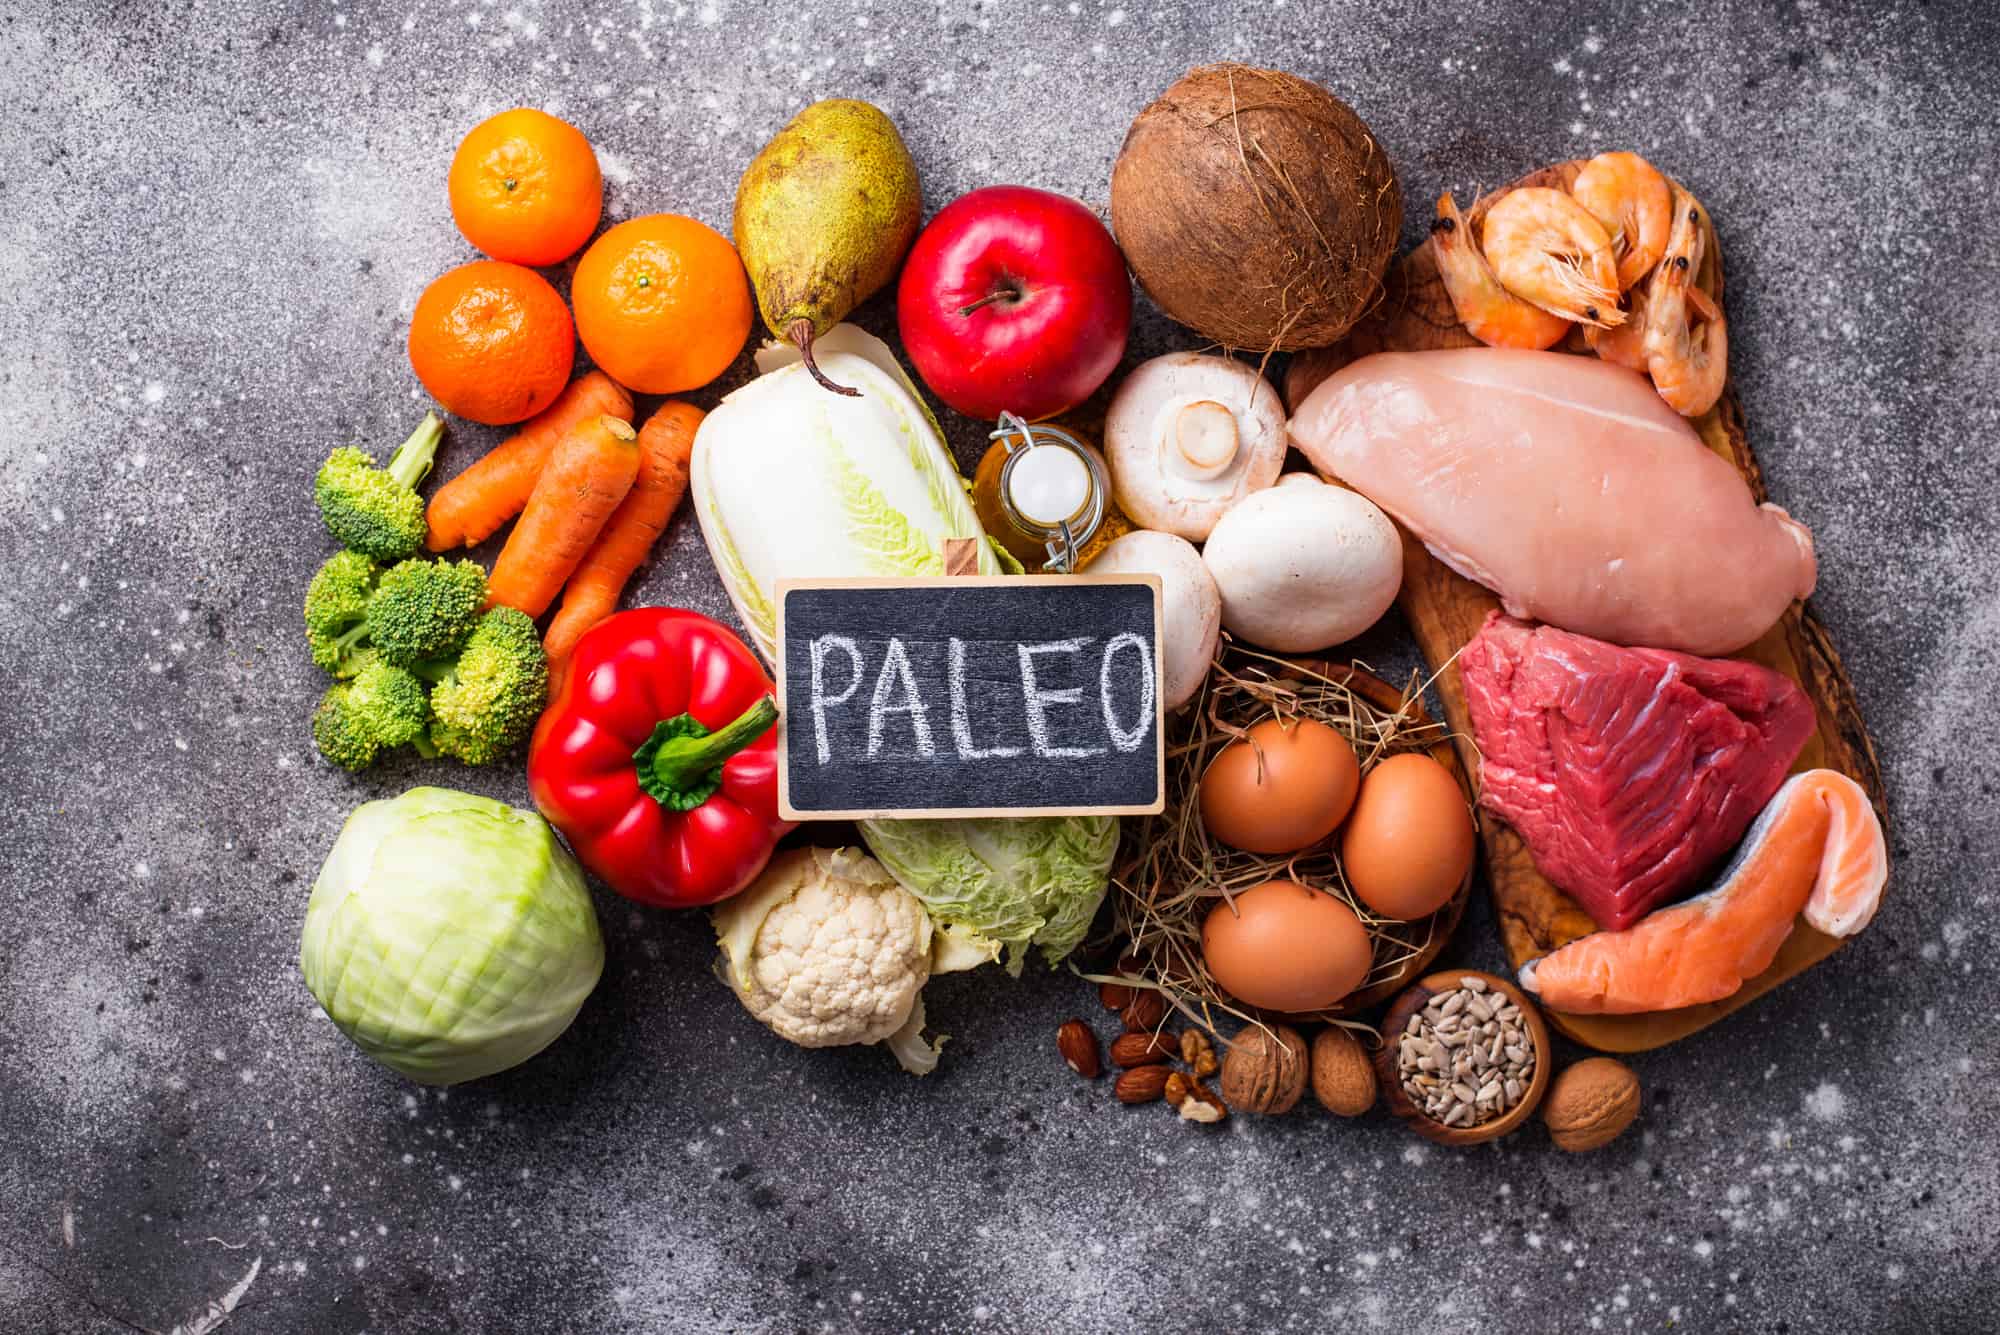 The Paleo diet, also known as the 'caveman diet,' is a nutritional plan based on foods believed to have been consumed during the Paleolithic era. This diet focuses on whole foods, lean proteins, vegetables, fruits, nuts, and seeds while avoiding processed foods, grains, and dairy. 